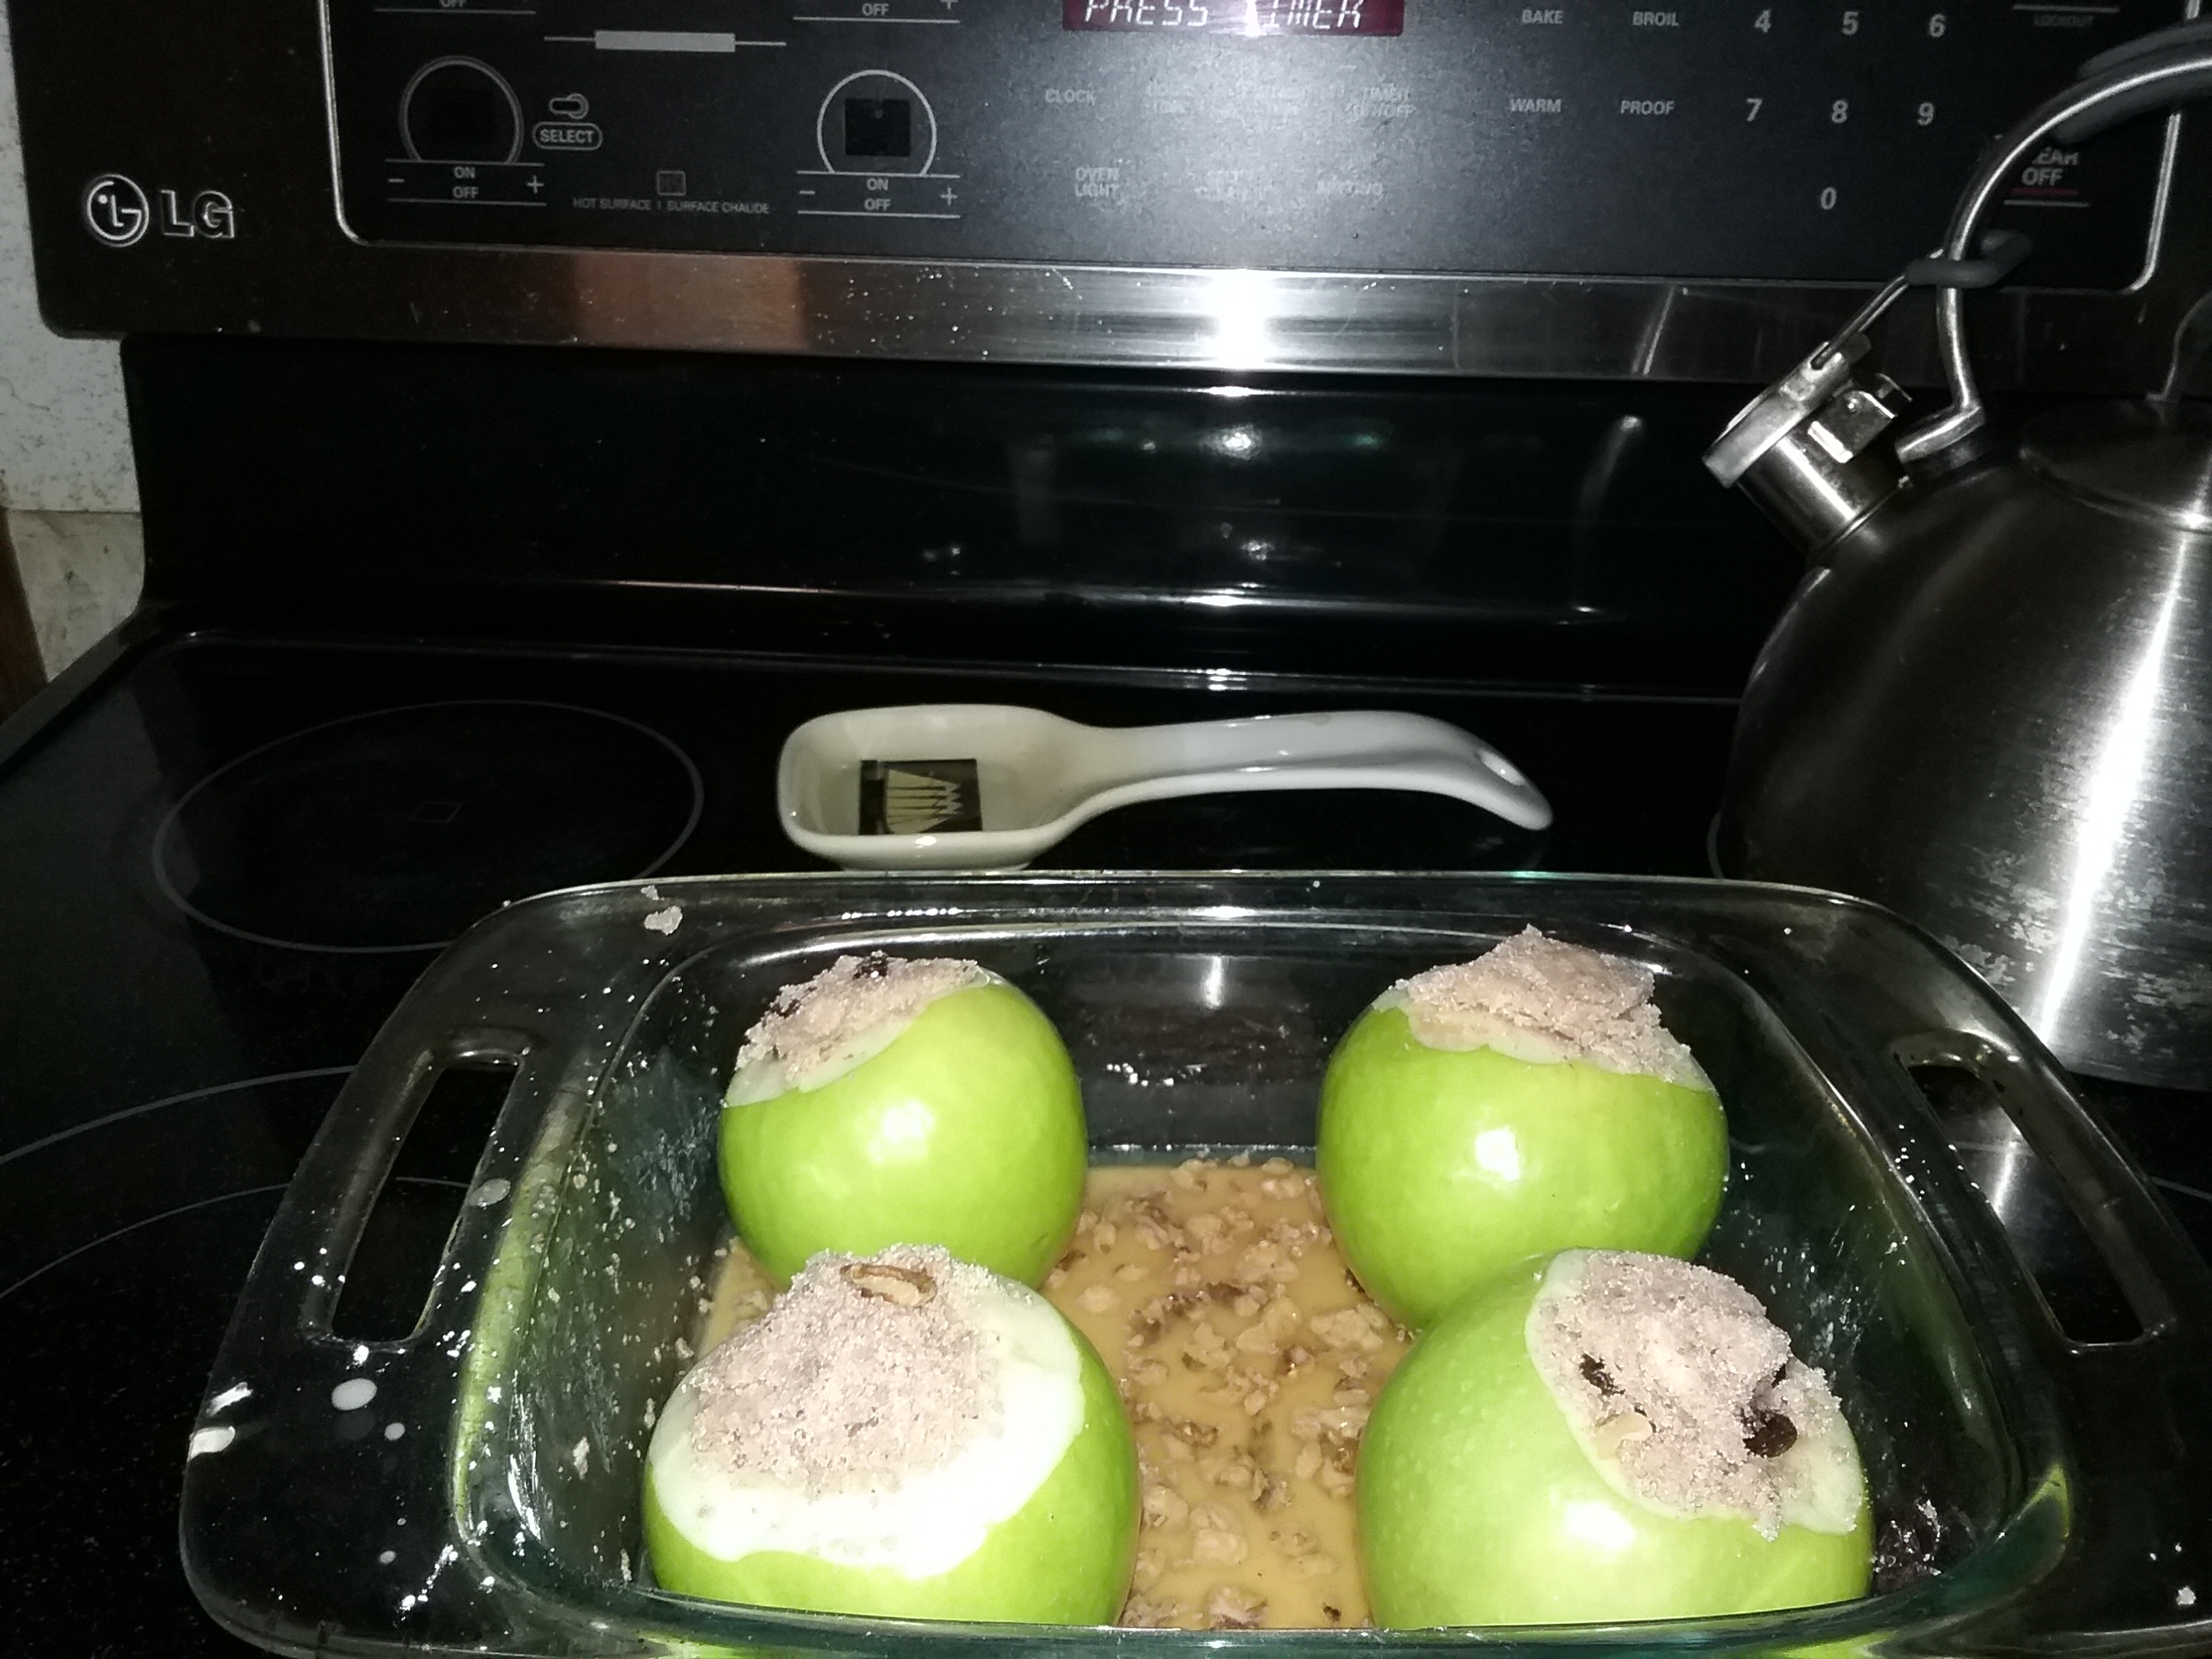 Spiced Pirate Baked Apples